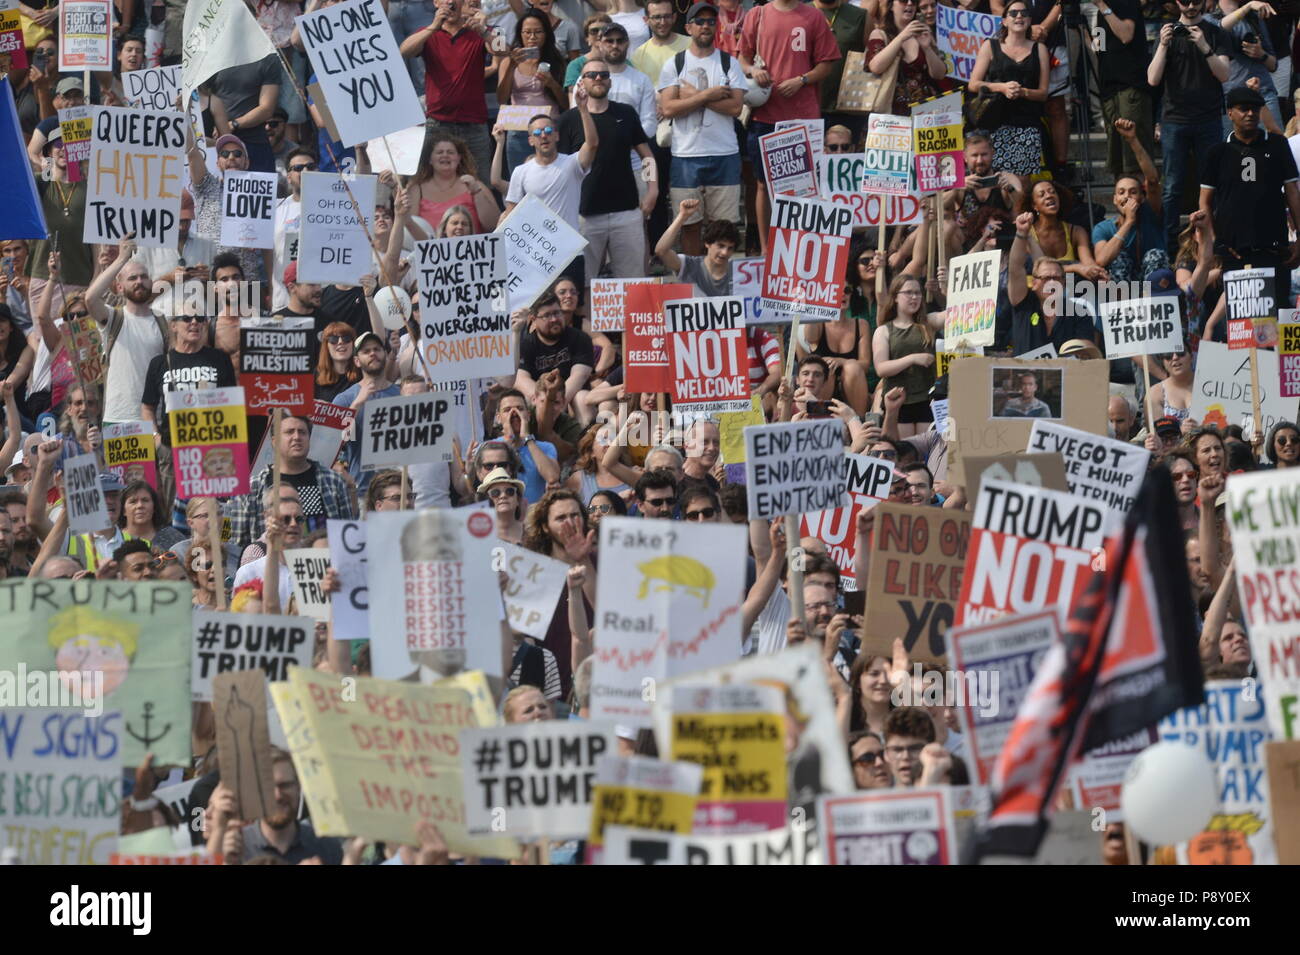 Demonstrators gather in Trafalgar Square, London during a 'Stop Trump' march as part of the protests against the visit of US President Donald Trump to the UK. Stock Photo